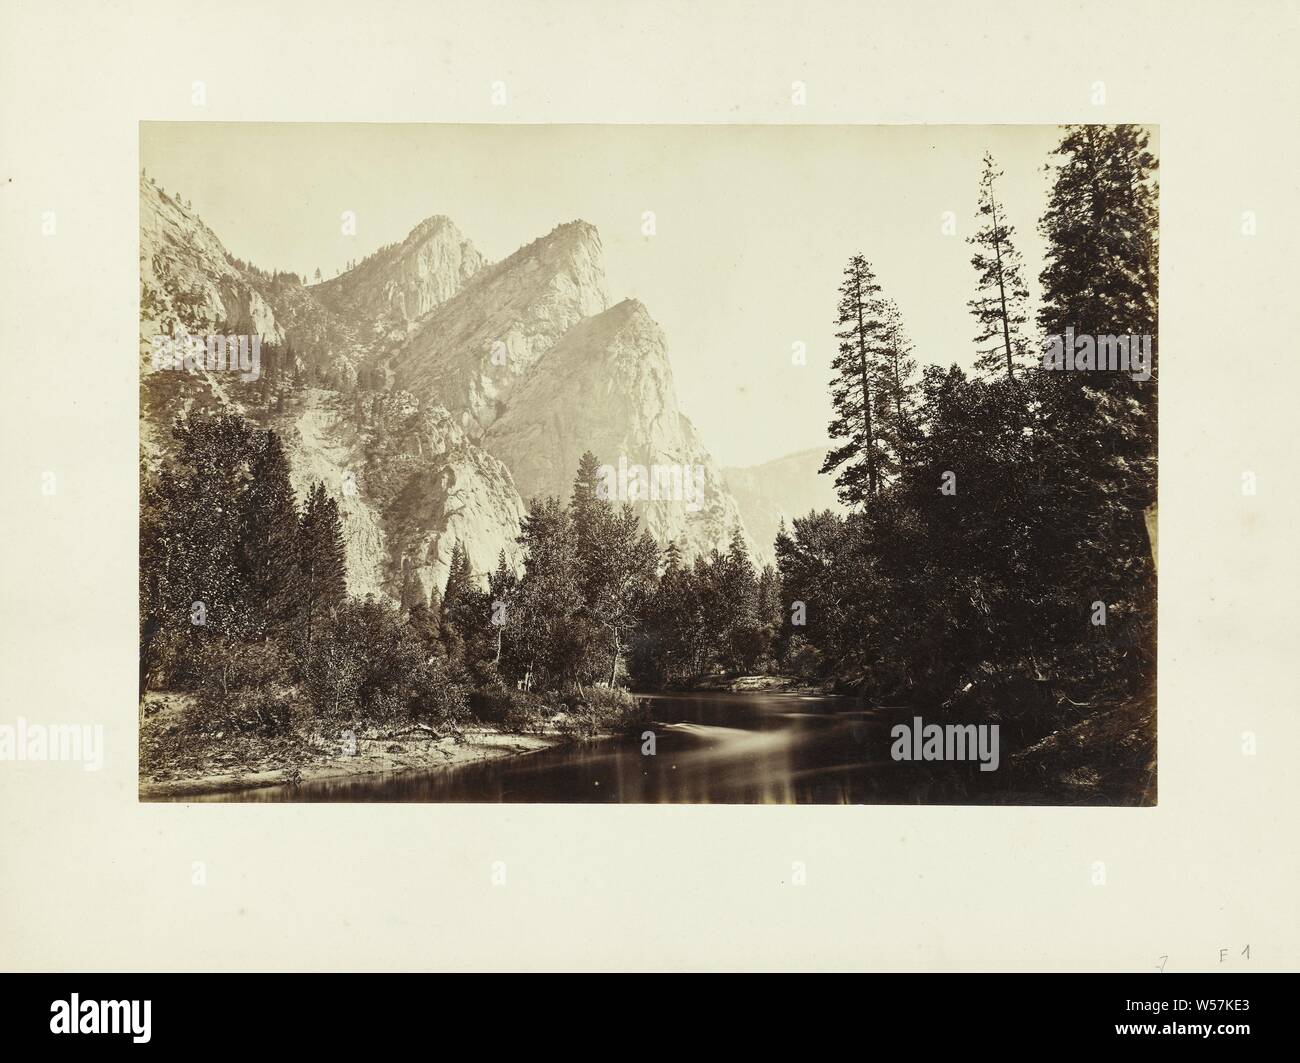 View of Yosemite Valley in California Yosemite Valley California (title on object), dale, valley, California, Carleton Emmons Watkins (mentioned on object), United States of America, 1860 - 1880, paper, cardboard, albumen print, h 202 mm × w 303 mm h 295 mm × w 398 mm Stock Photo